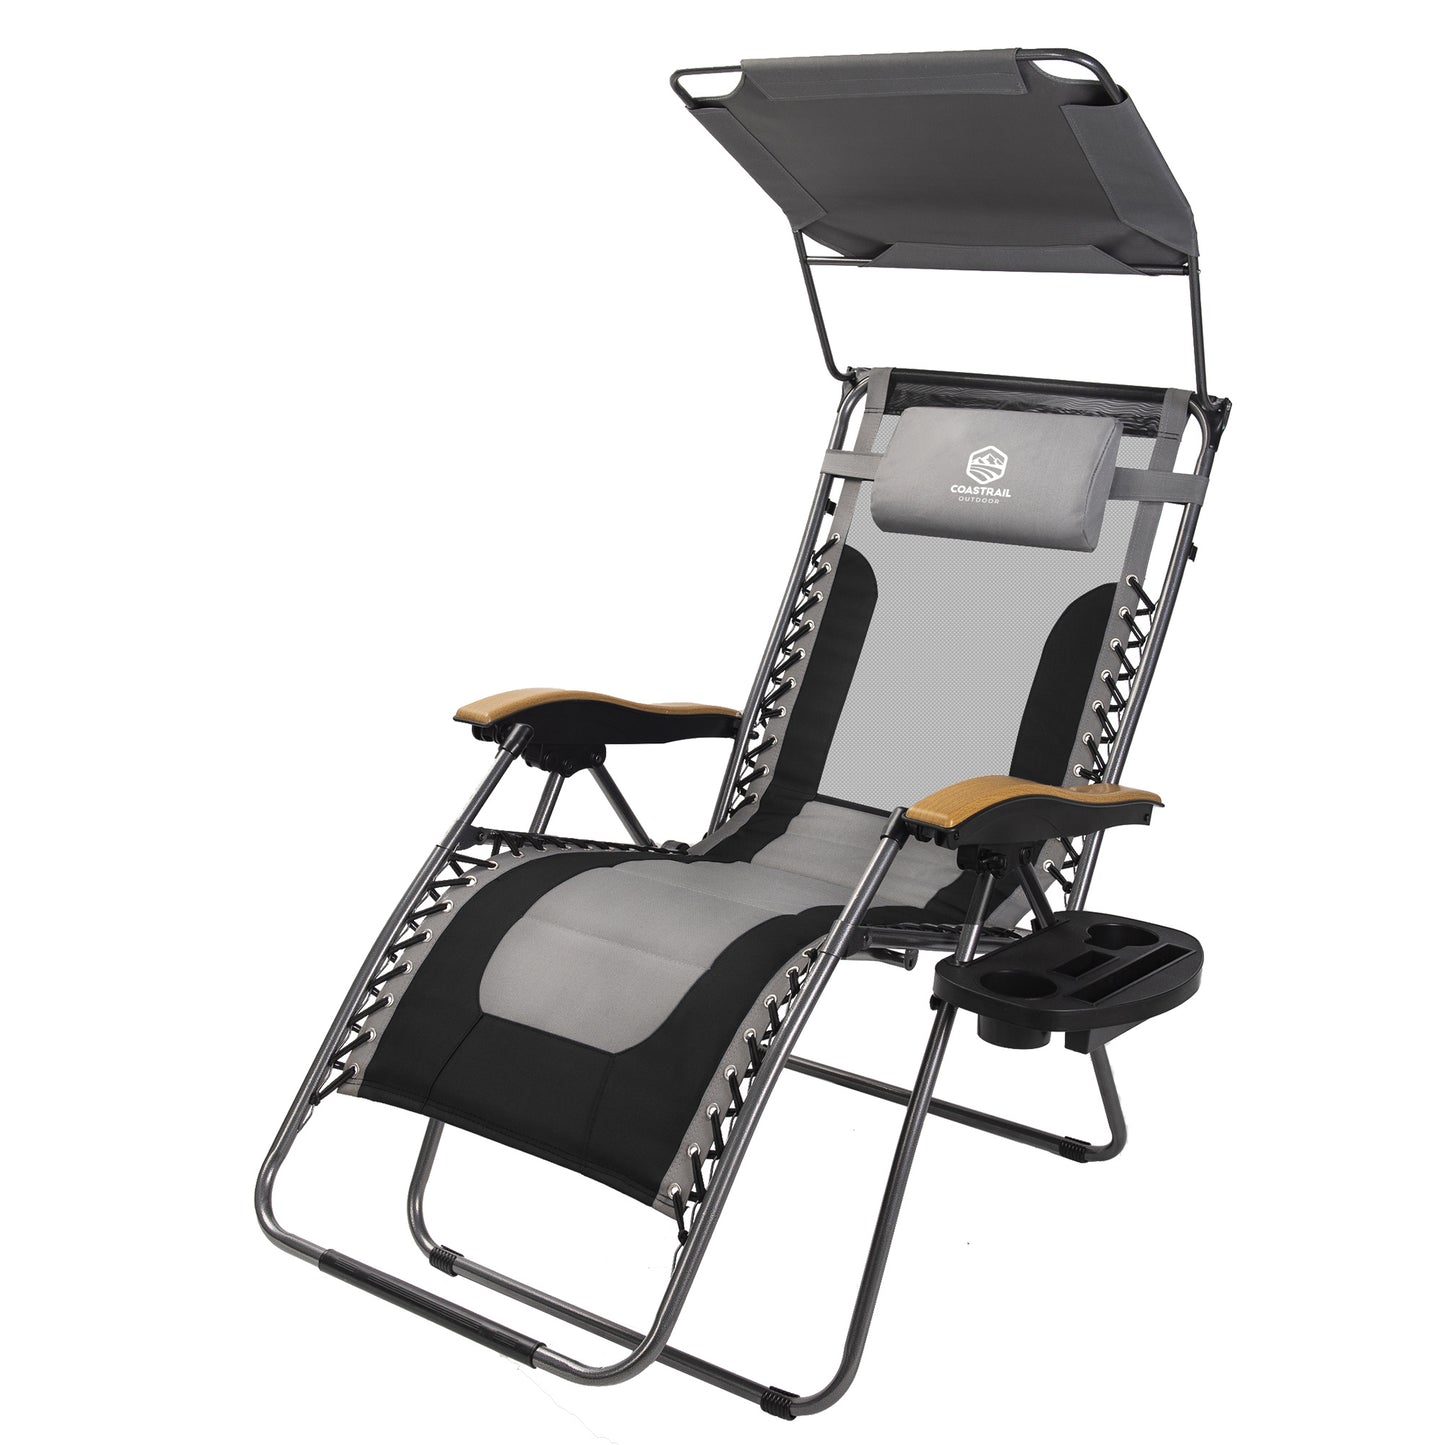 Outdoor Premium Zero Gravity Reclining Lounge Chair with Sun Shade;  Padded Seat;  Cool Mesh Back;  Pillow;  Cup Holder & Side Table for Sports Yard Patio Lawn Camping;  Support 400lbs